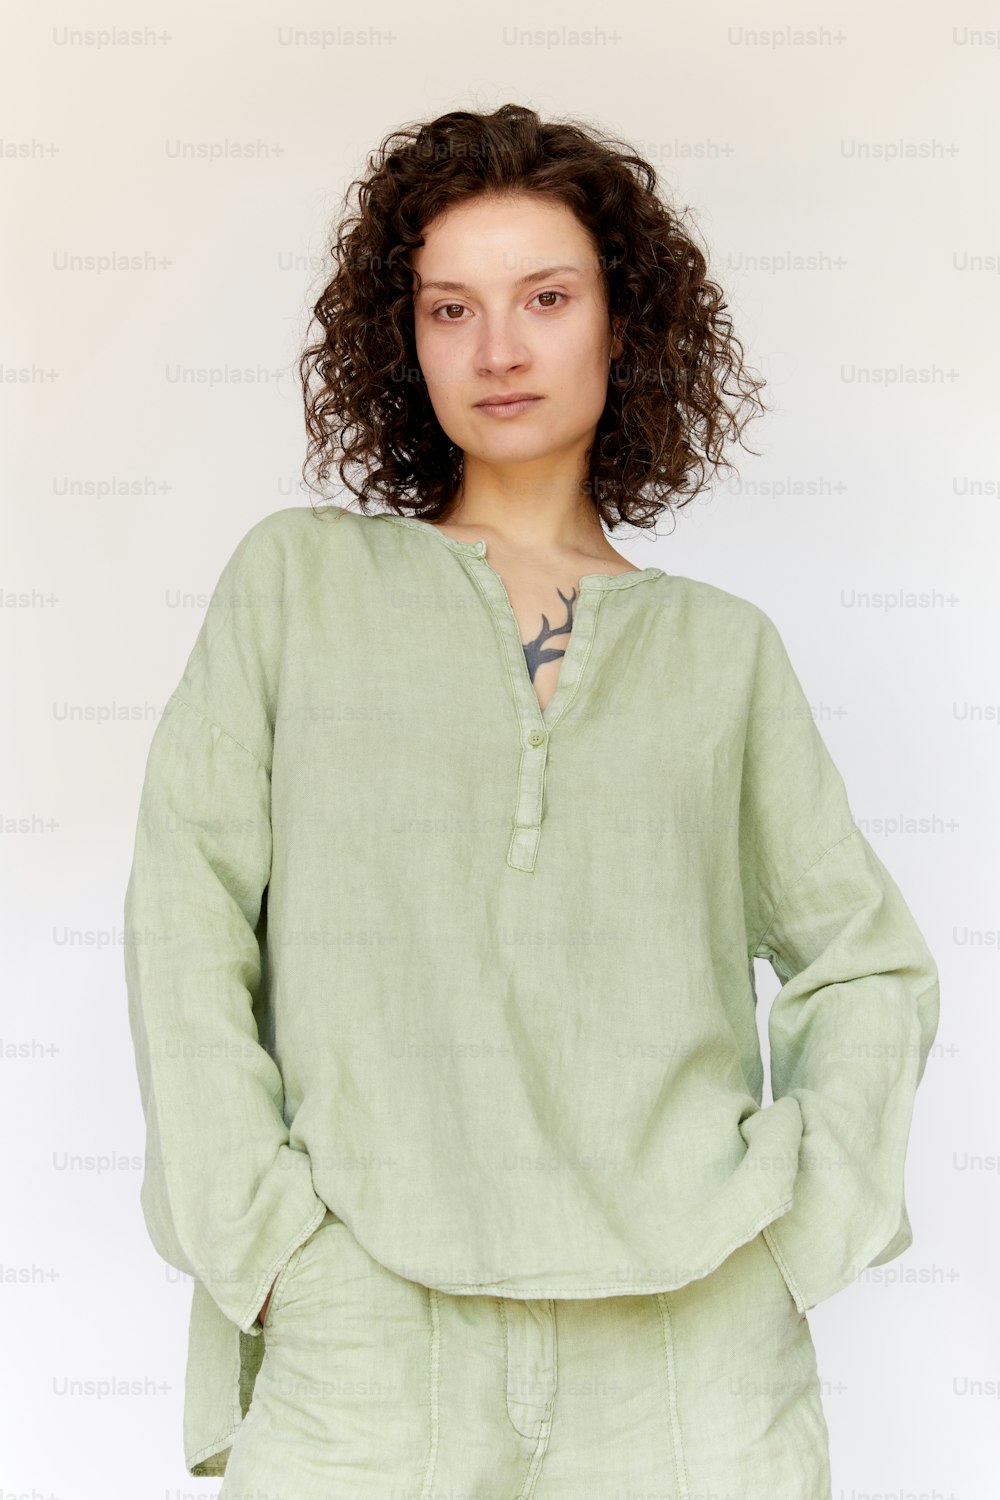 a woman with curly hair wearing a green shirt